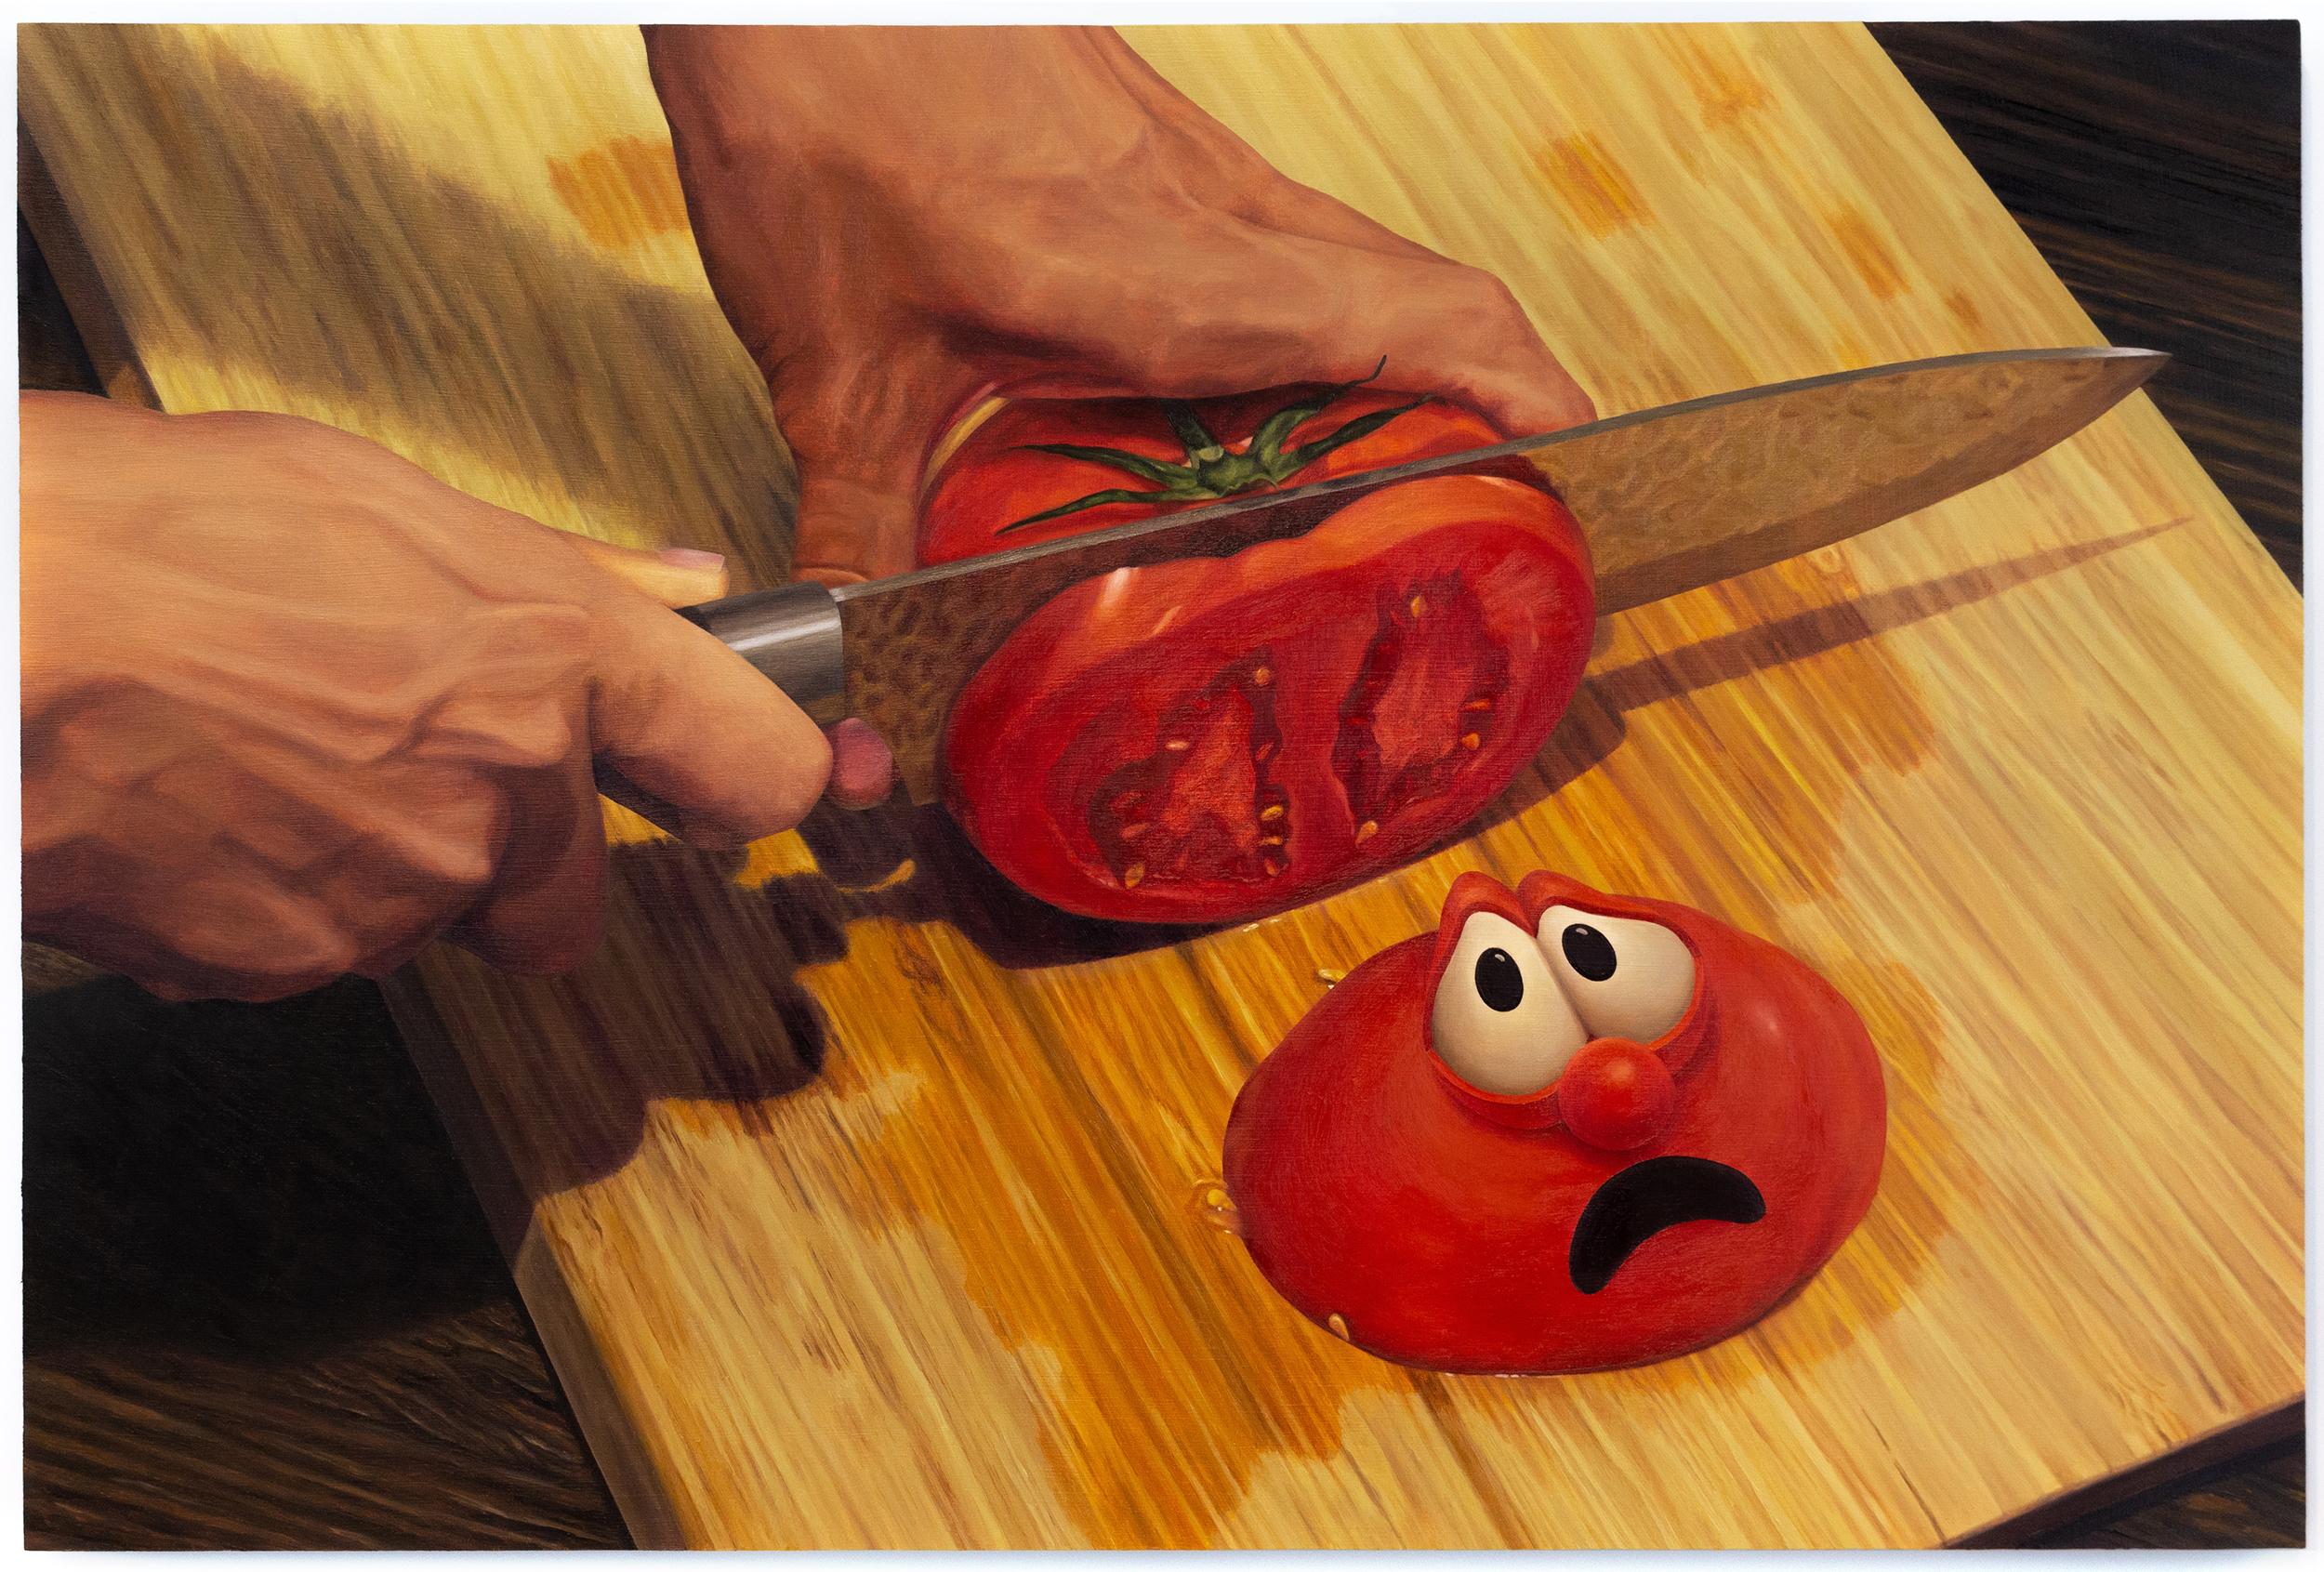 Victoria Sauer Figurative Painting - GOD WANTS ME TO FORGIVE THEM!?! - Oil Painting of a Frightened Bob the Tomato 